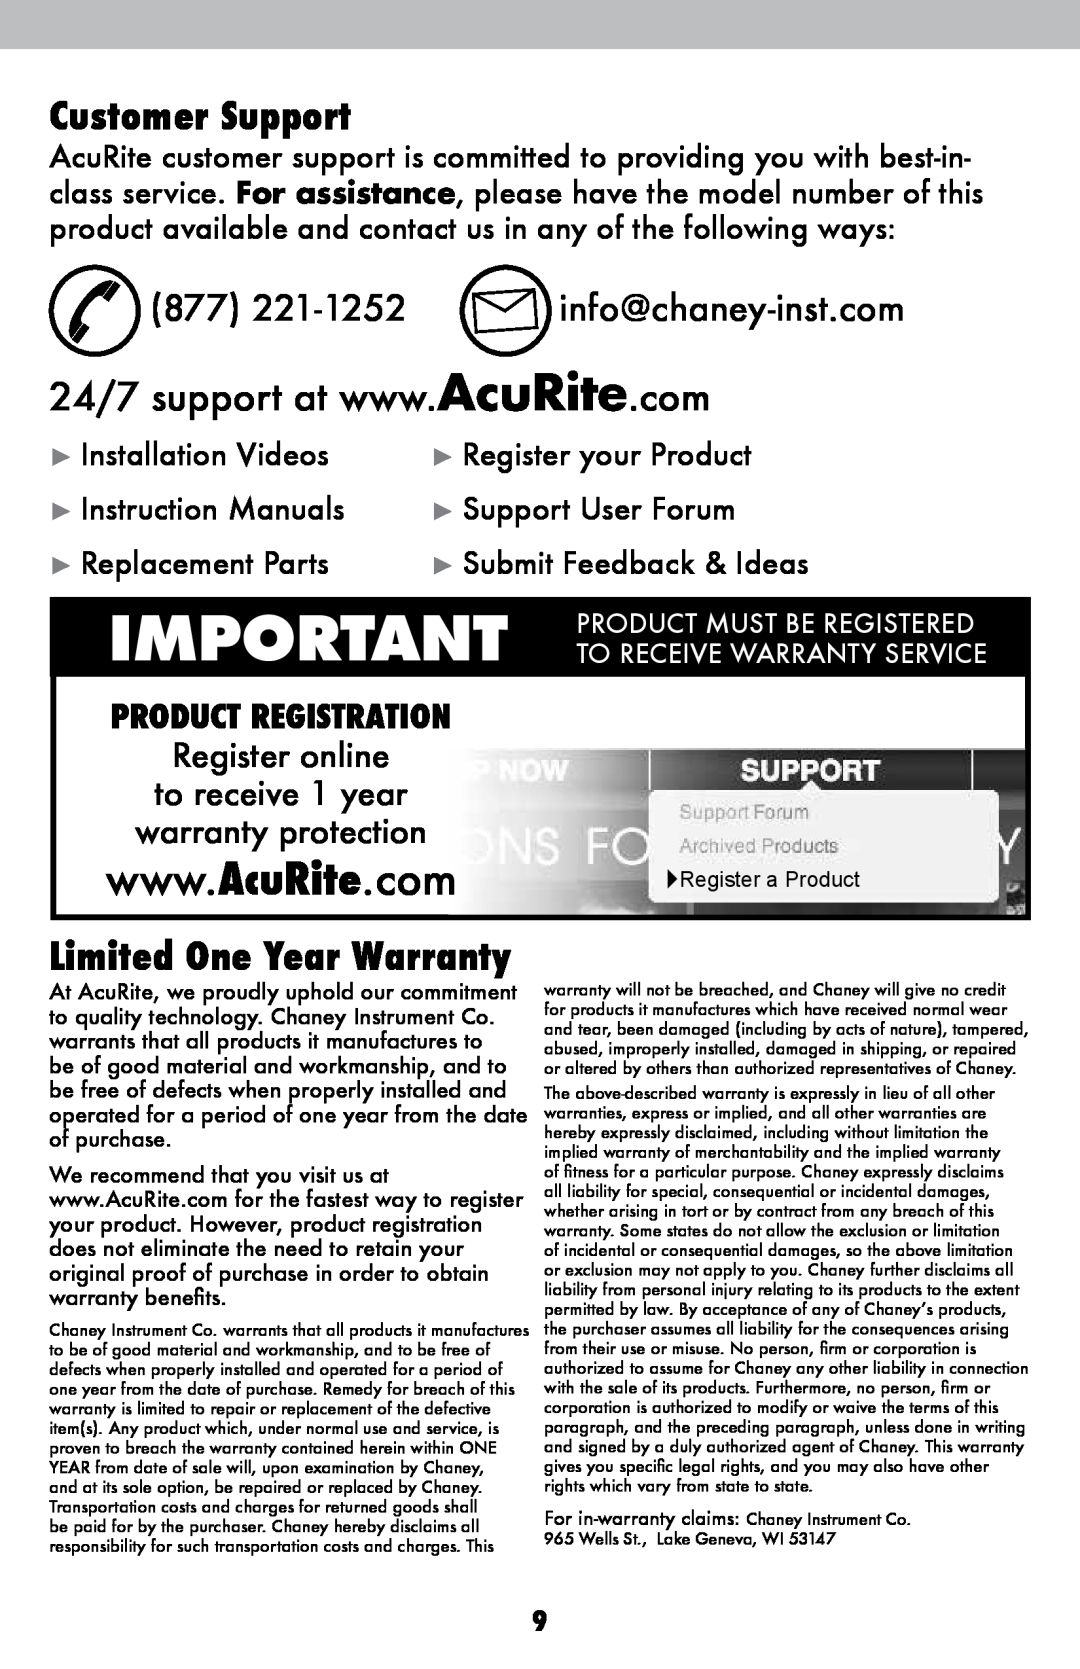 Acu-Rite 19956, 19958 Customer Support, 877 221-1252 info@chaney-inst.com, Limited One Year Warranty, Register online 